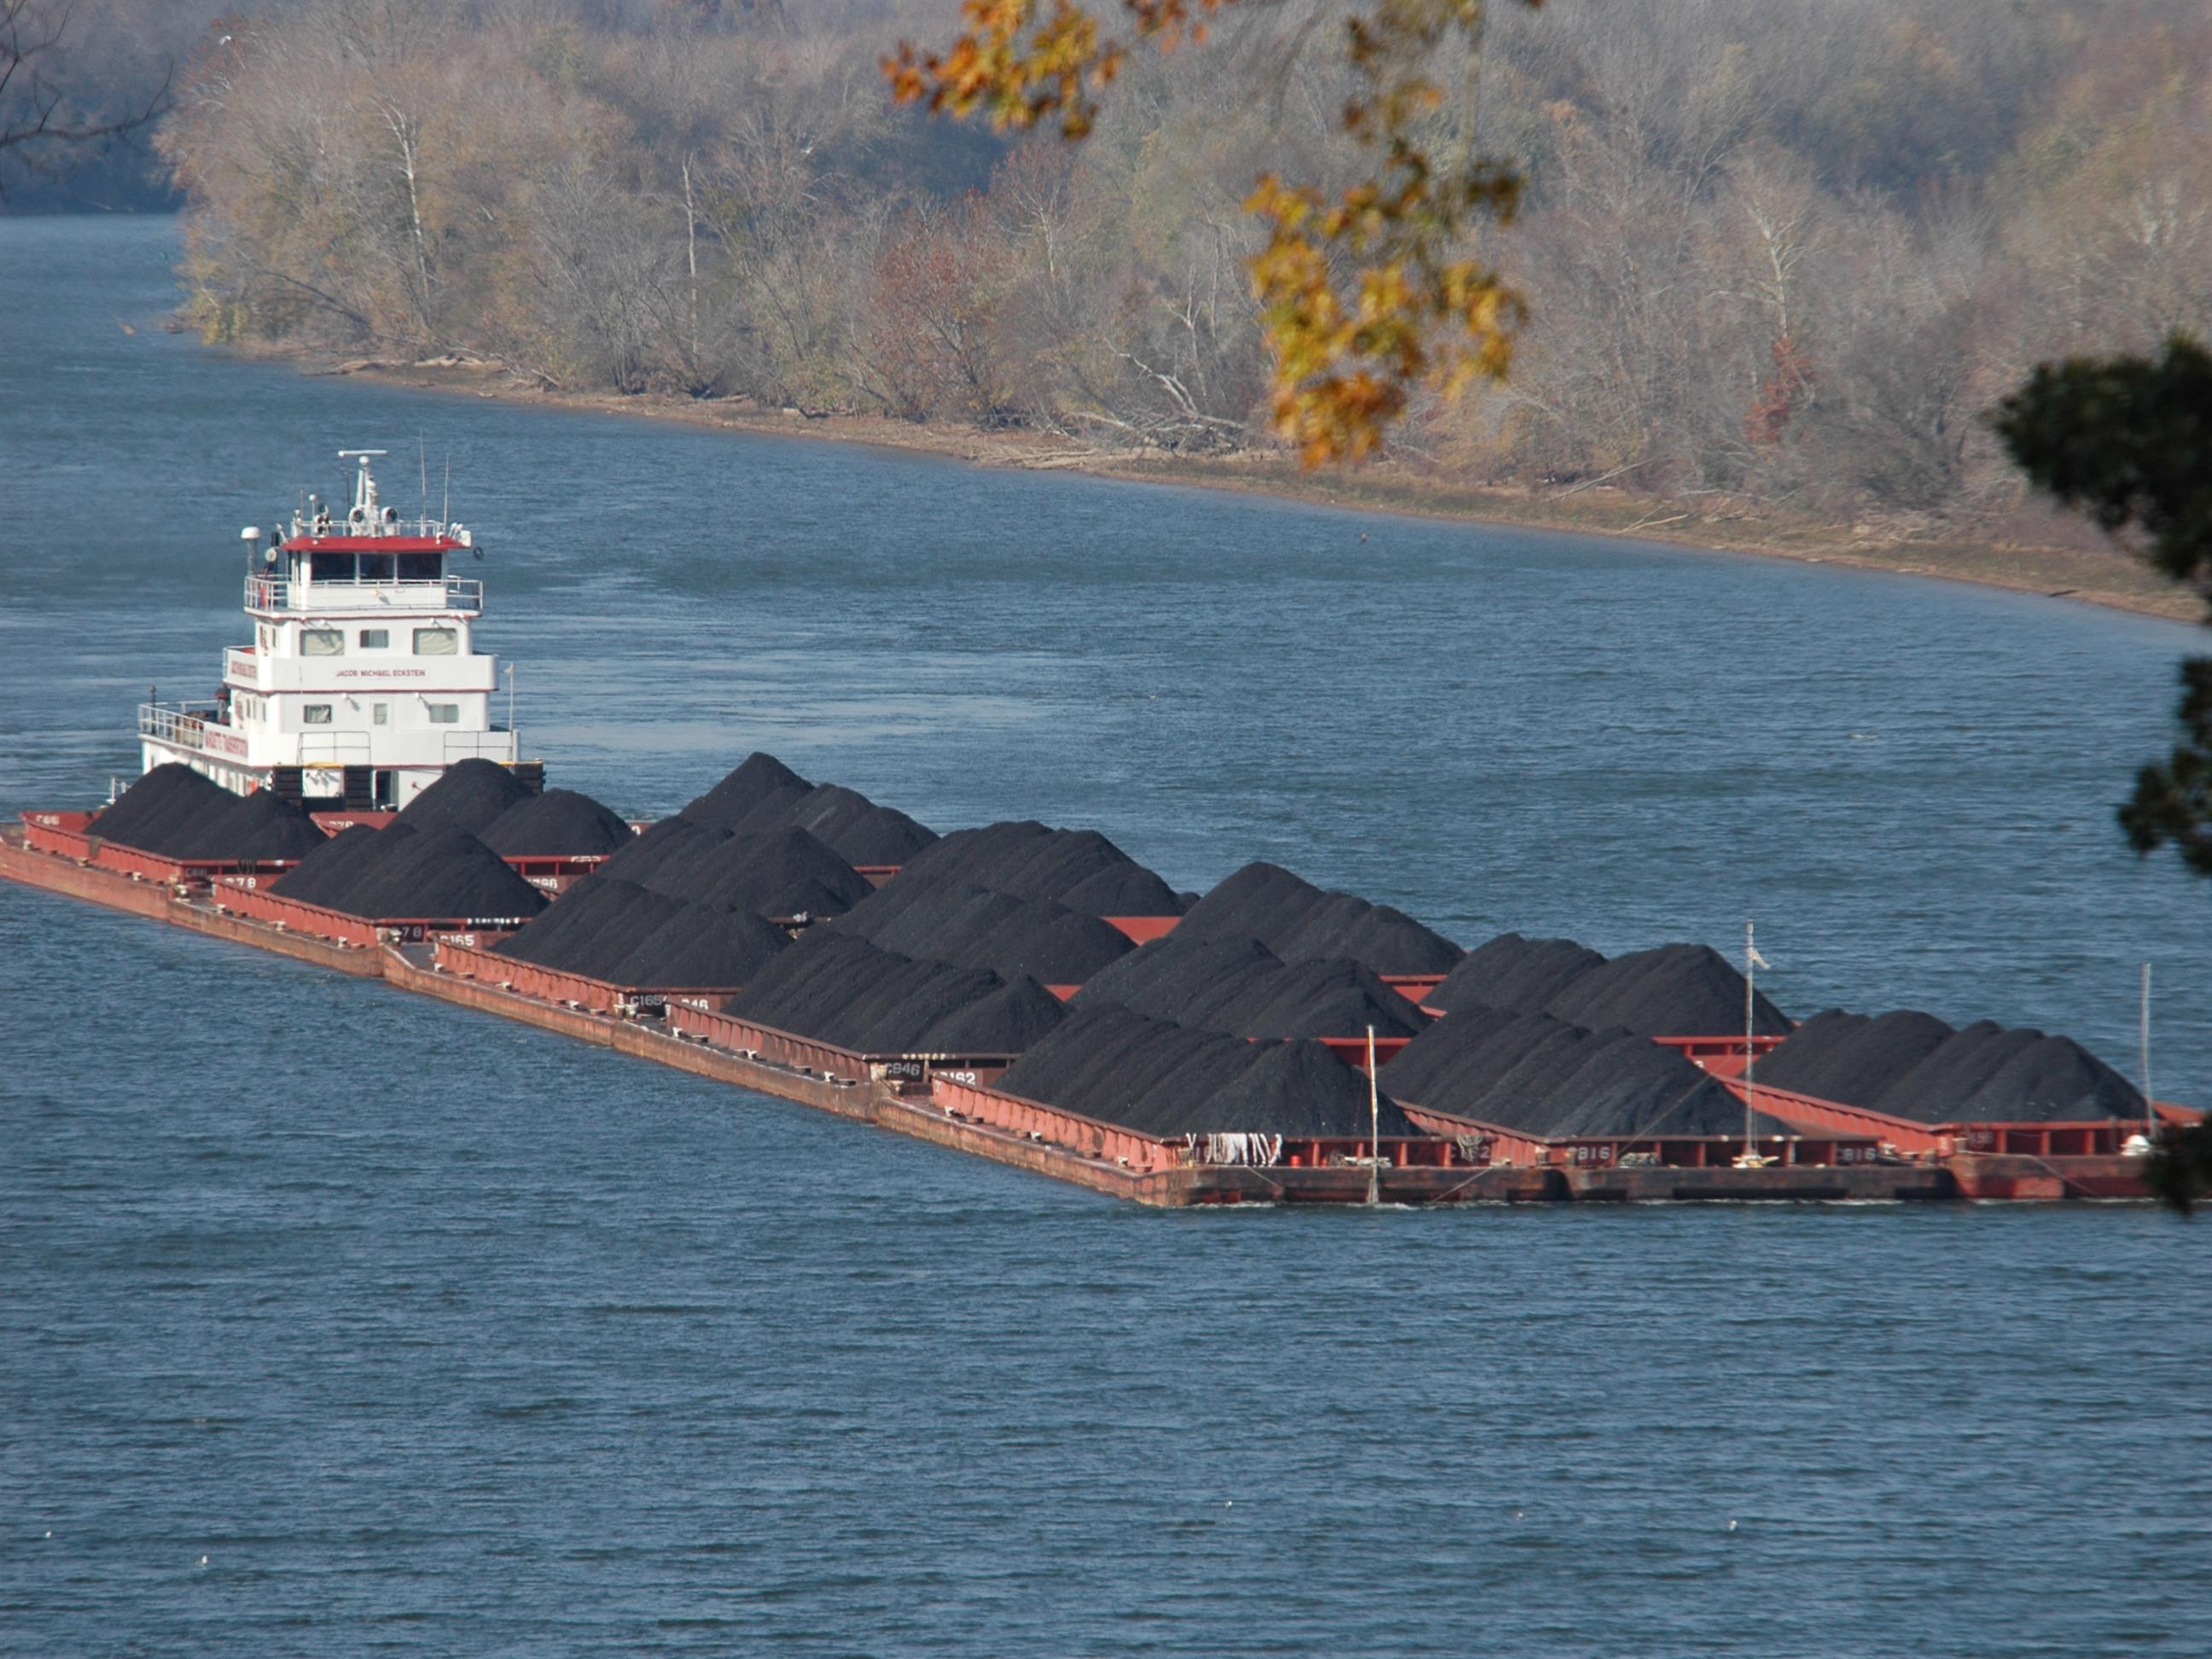 A Marquette River boat towing a barge full of coal